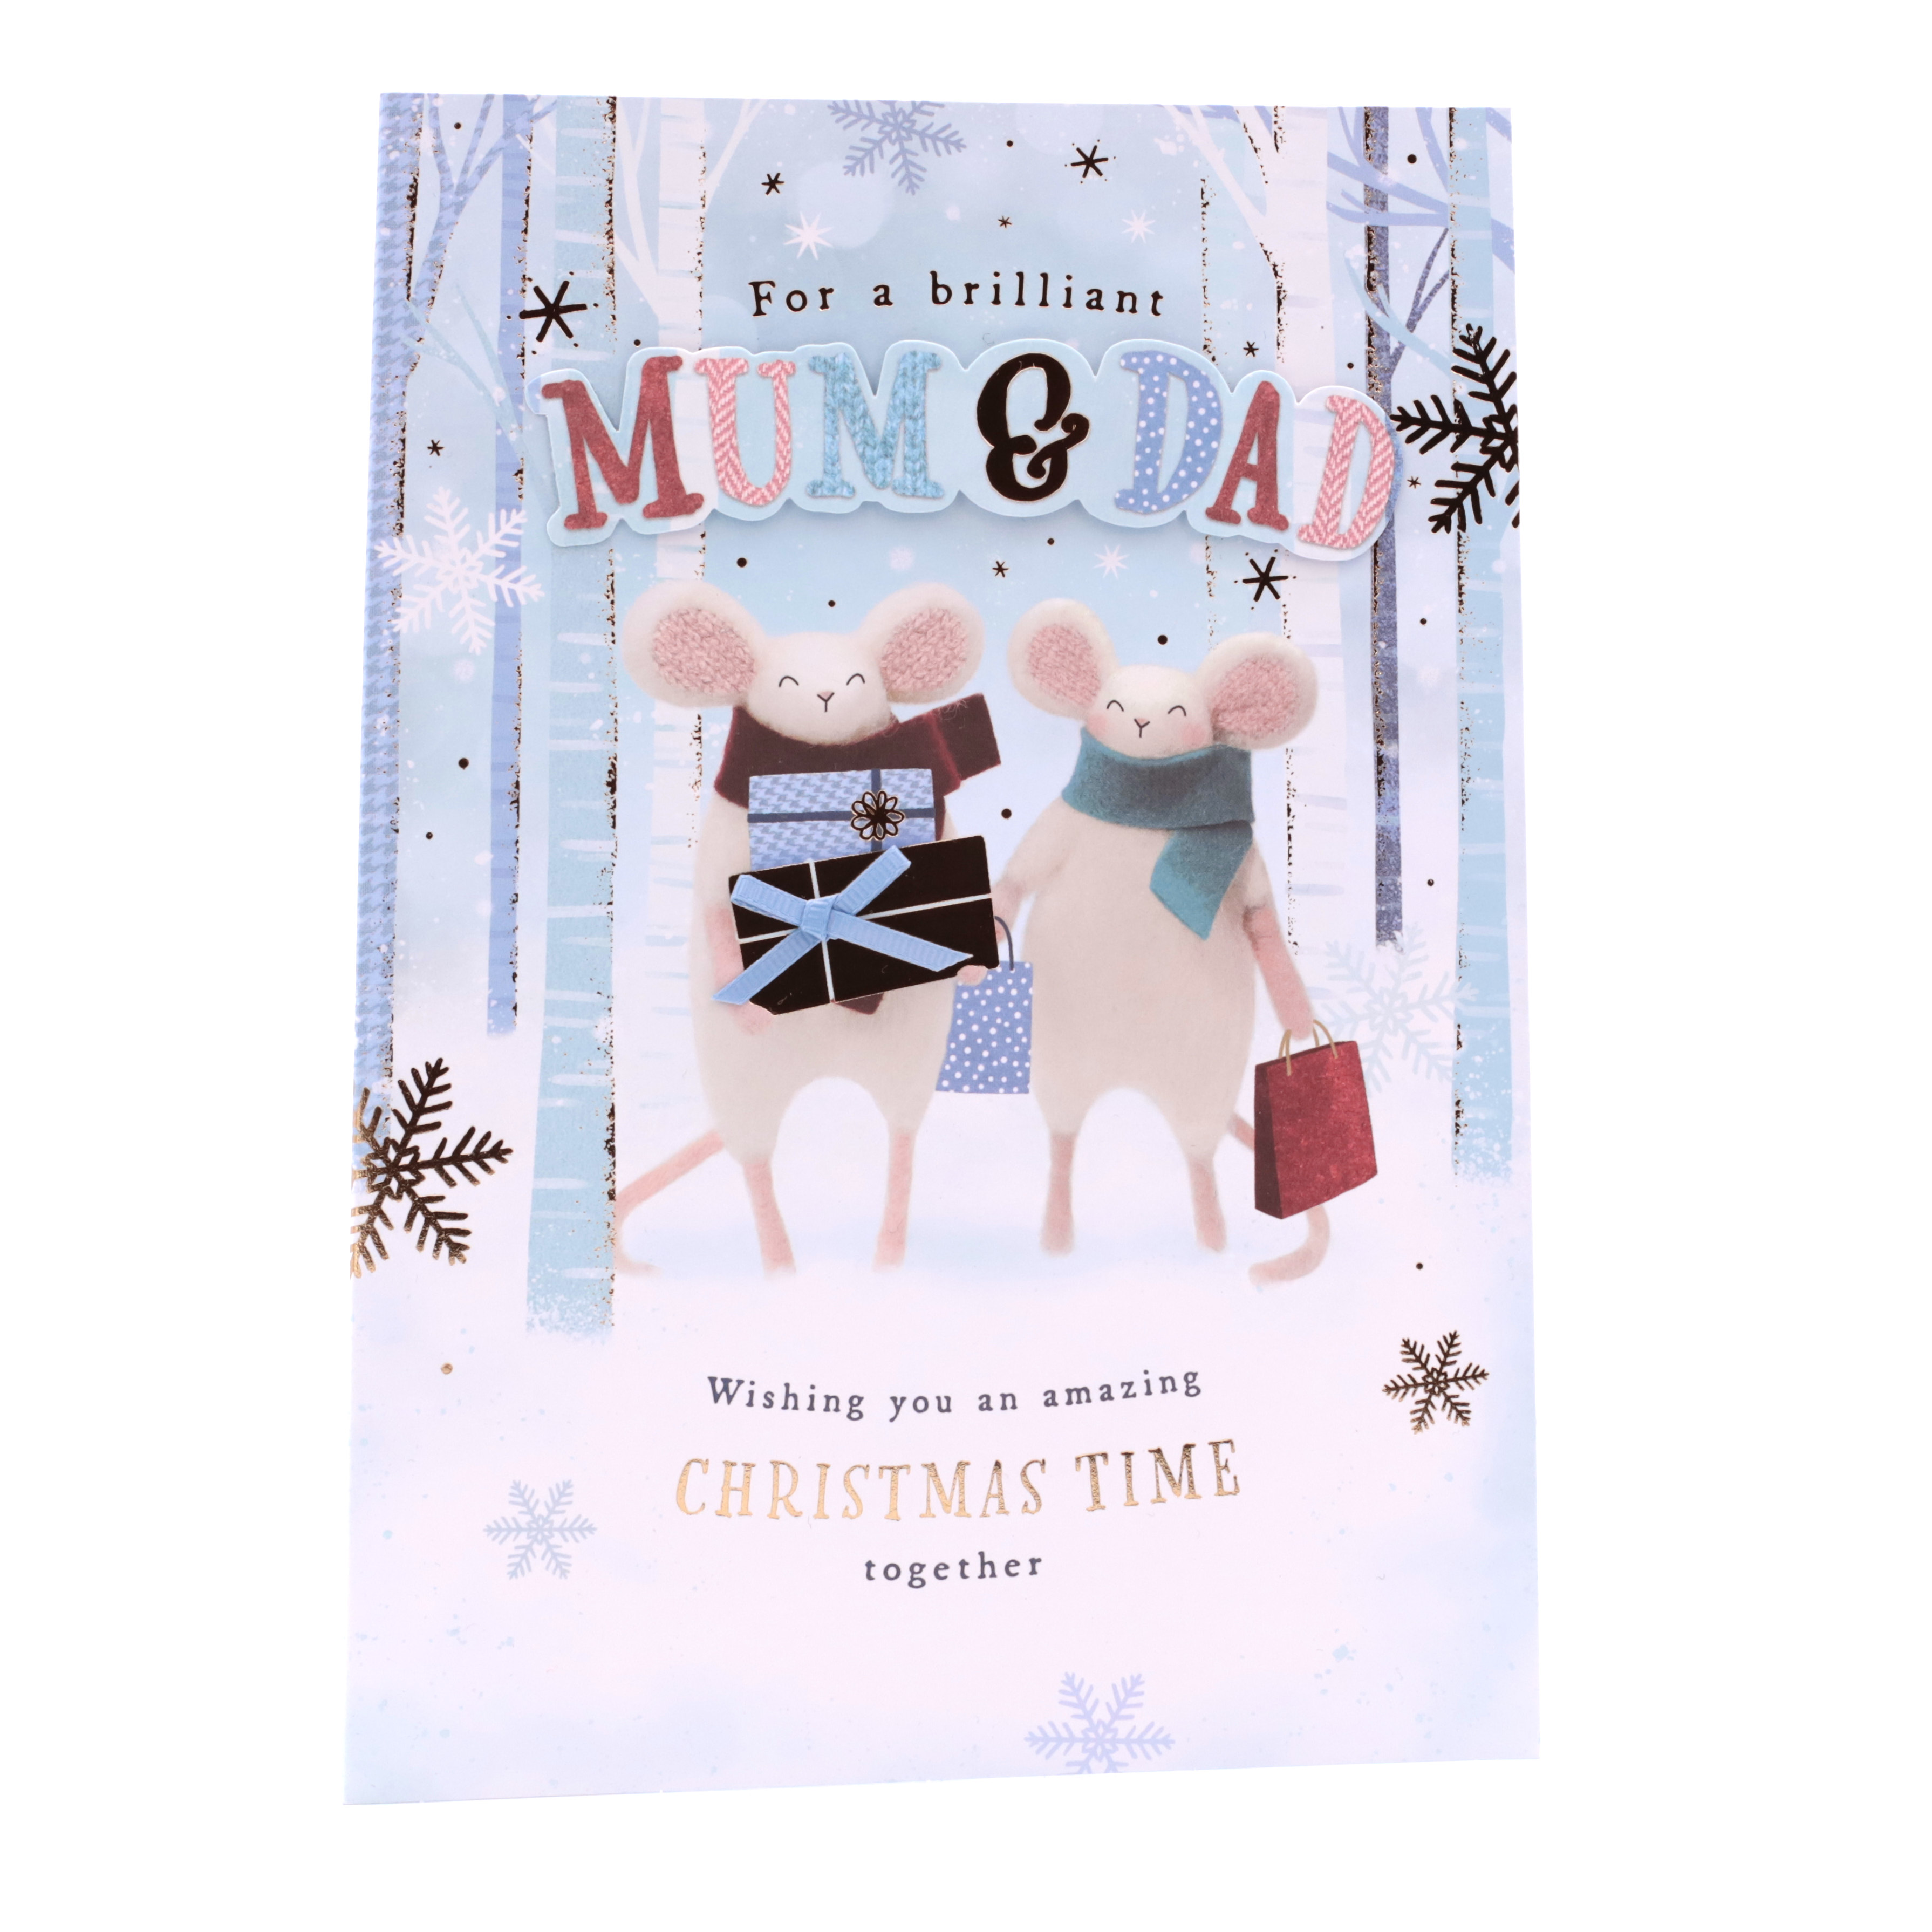 Christmas Card - Brilliant Mum And Dad, Cute Mice In The Wood